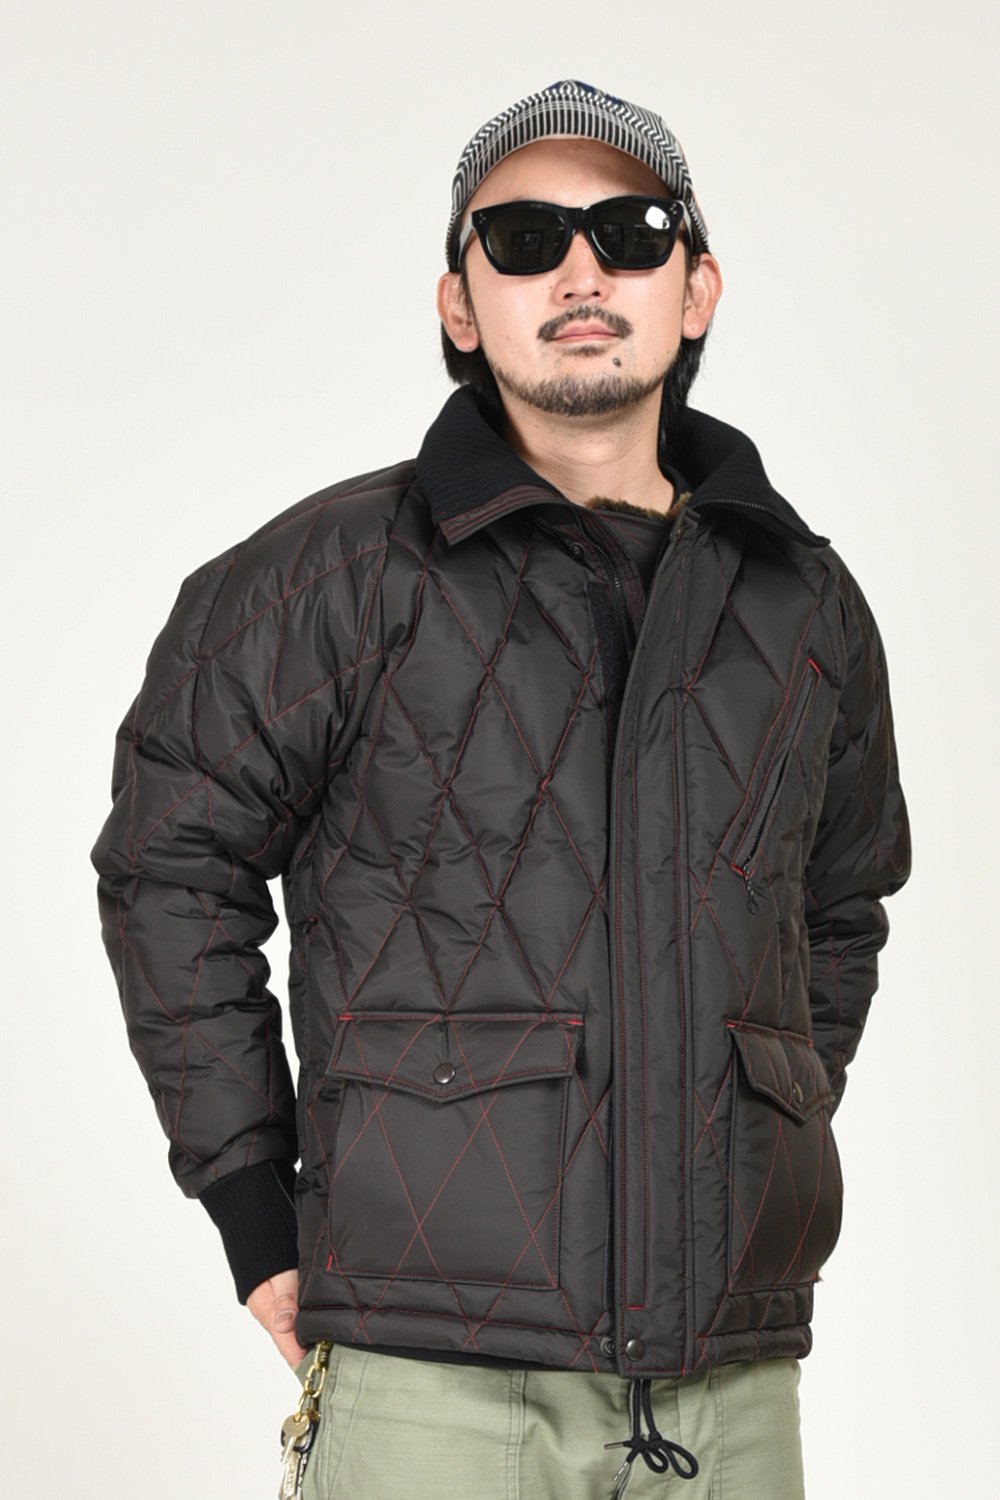 WESTRIDE(ウエストライド) レーシングダウンジャケット ALL NEW RACING DOWN JKT2 RELAX FIT with  WIND GUARD HJW-02RF | ハーレムストア公式通販サイト